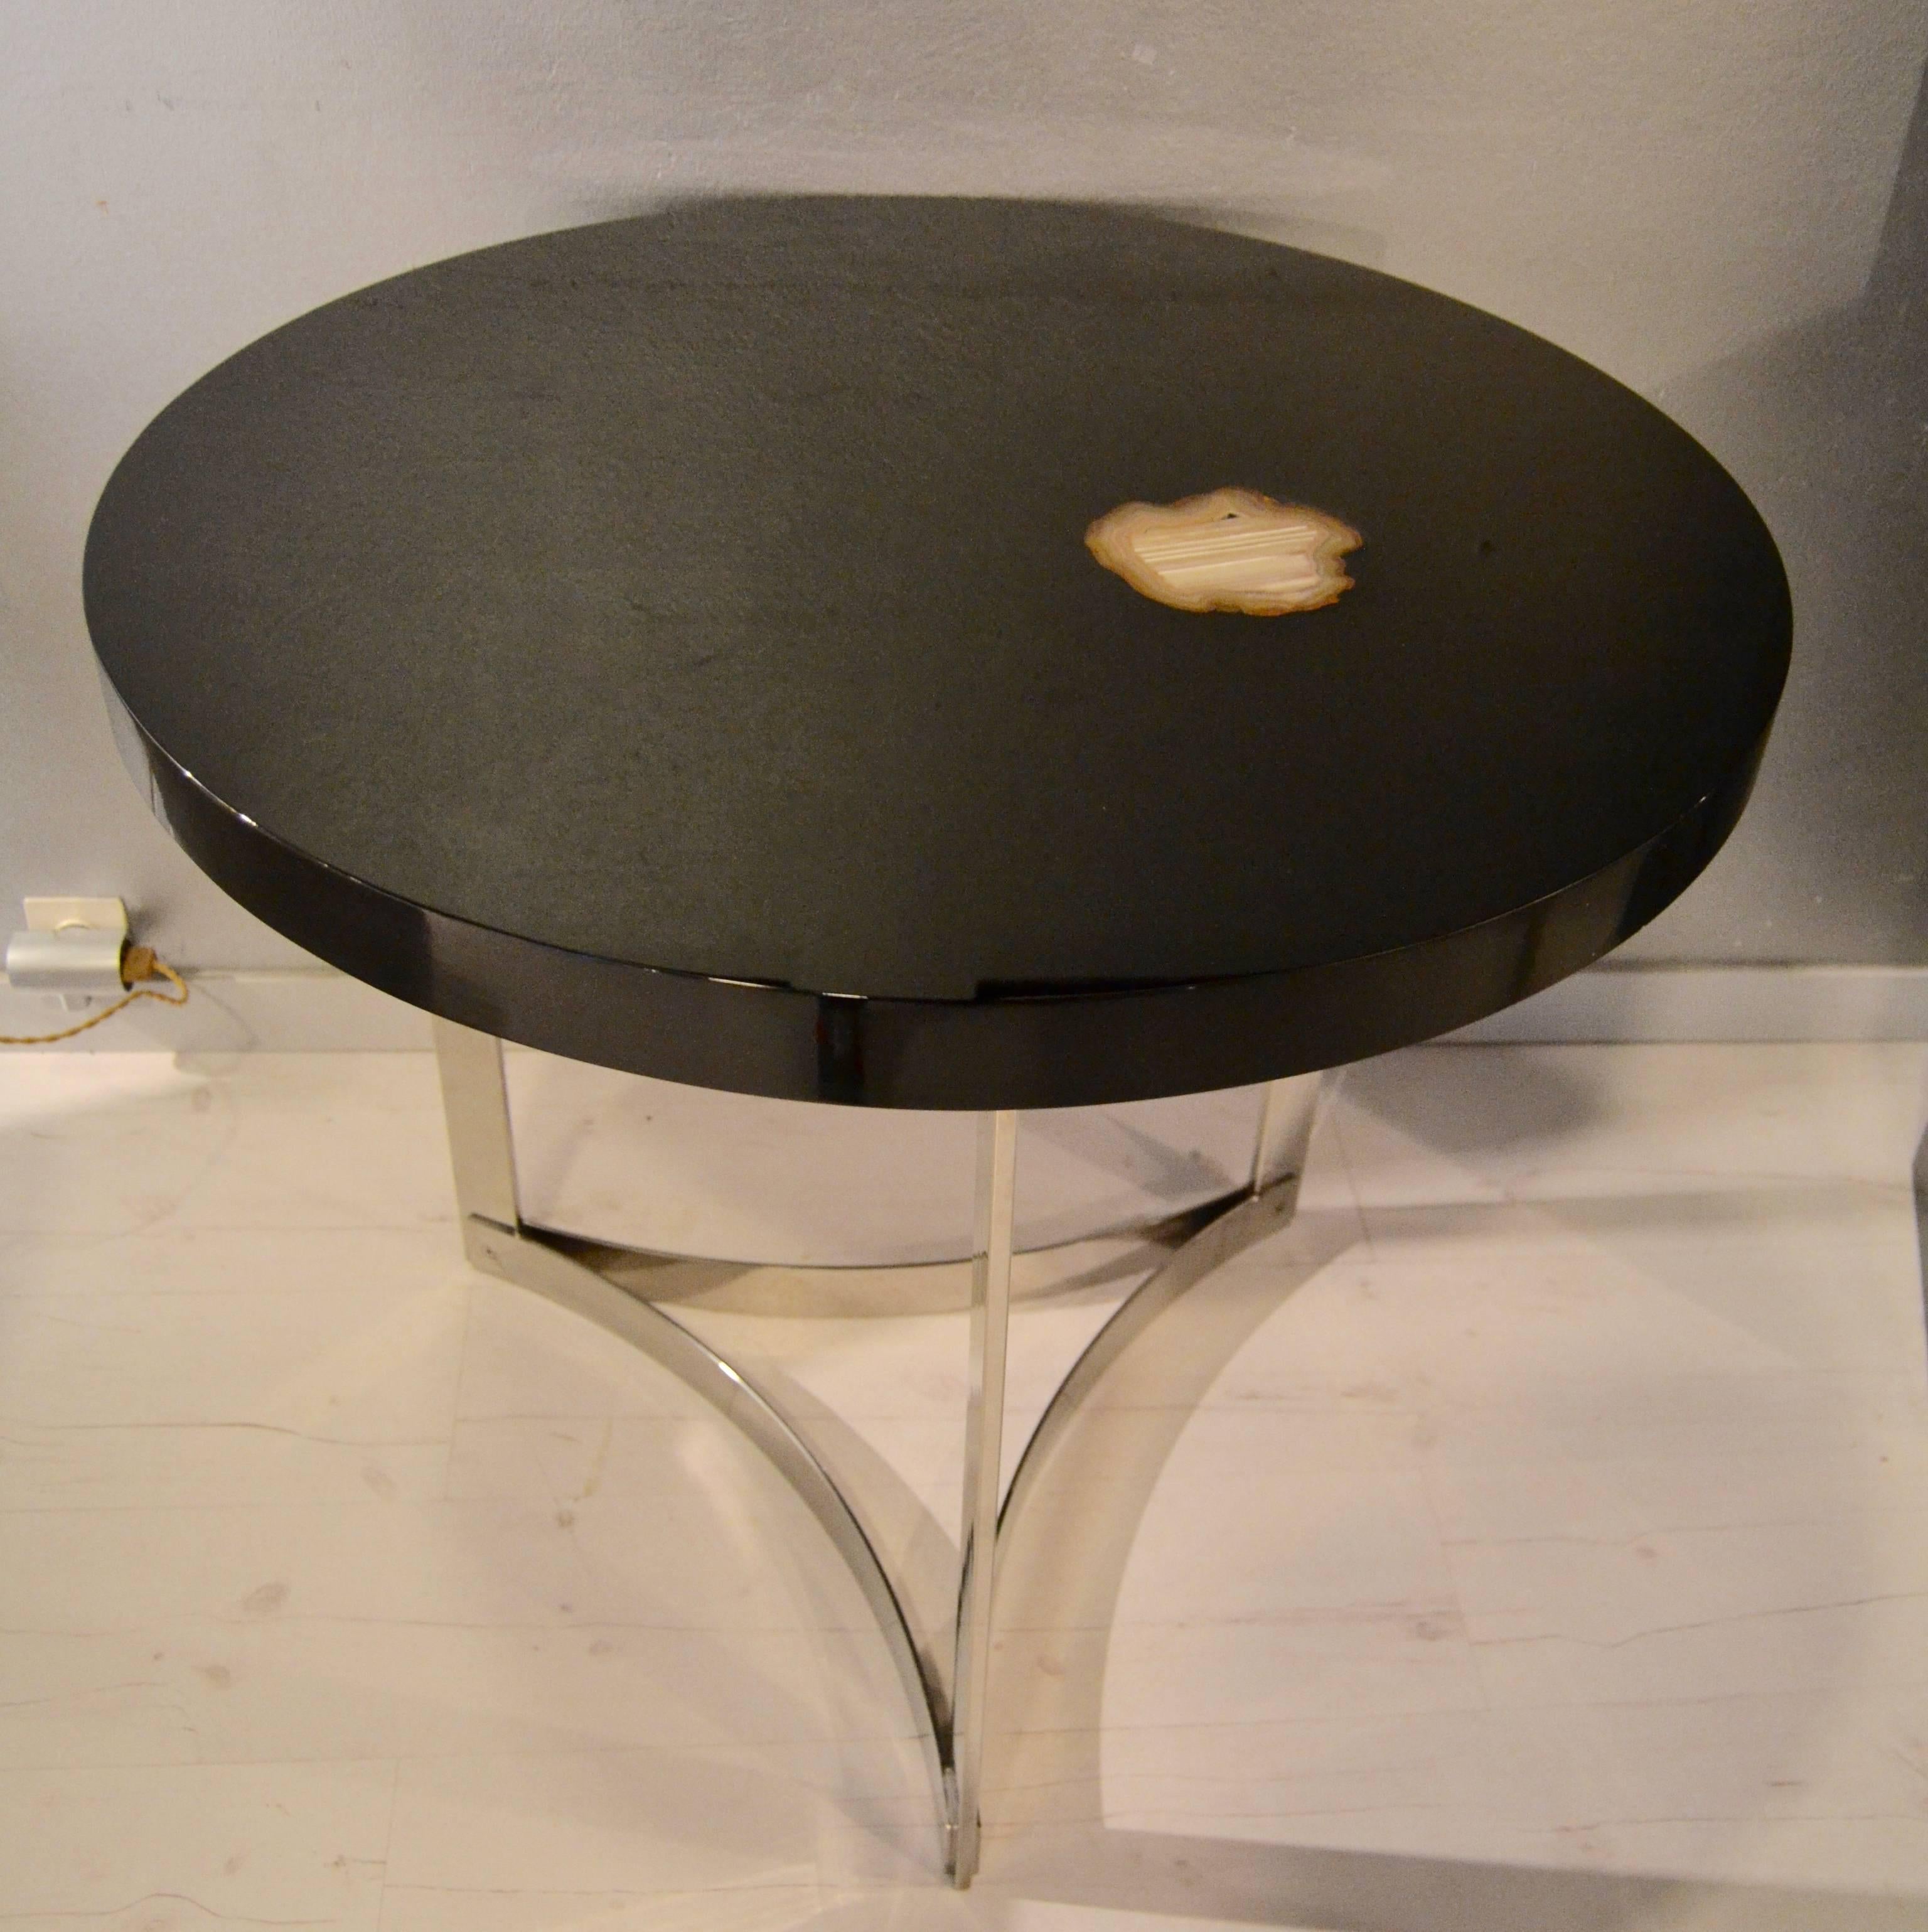 1970s black lacquered table with agate inlaid top
Great condition
Chromed steel feet
tabletop restored.